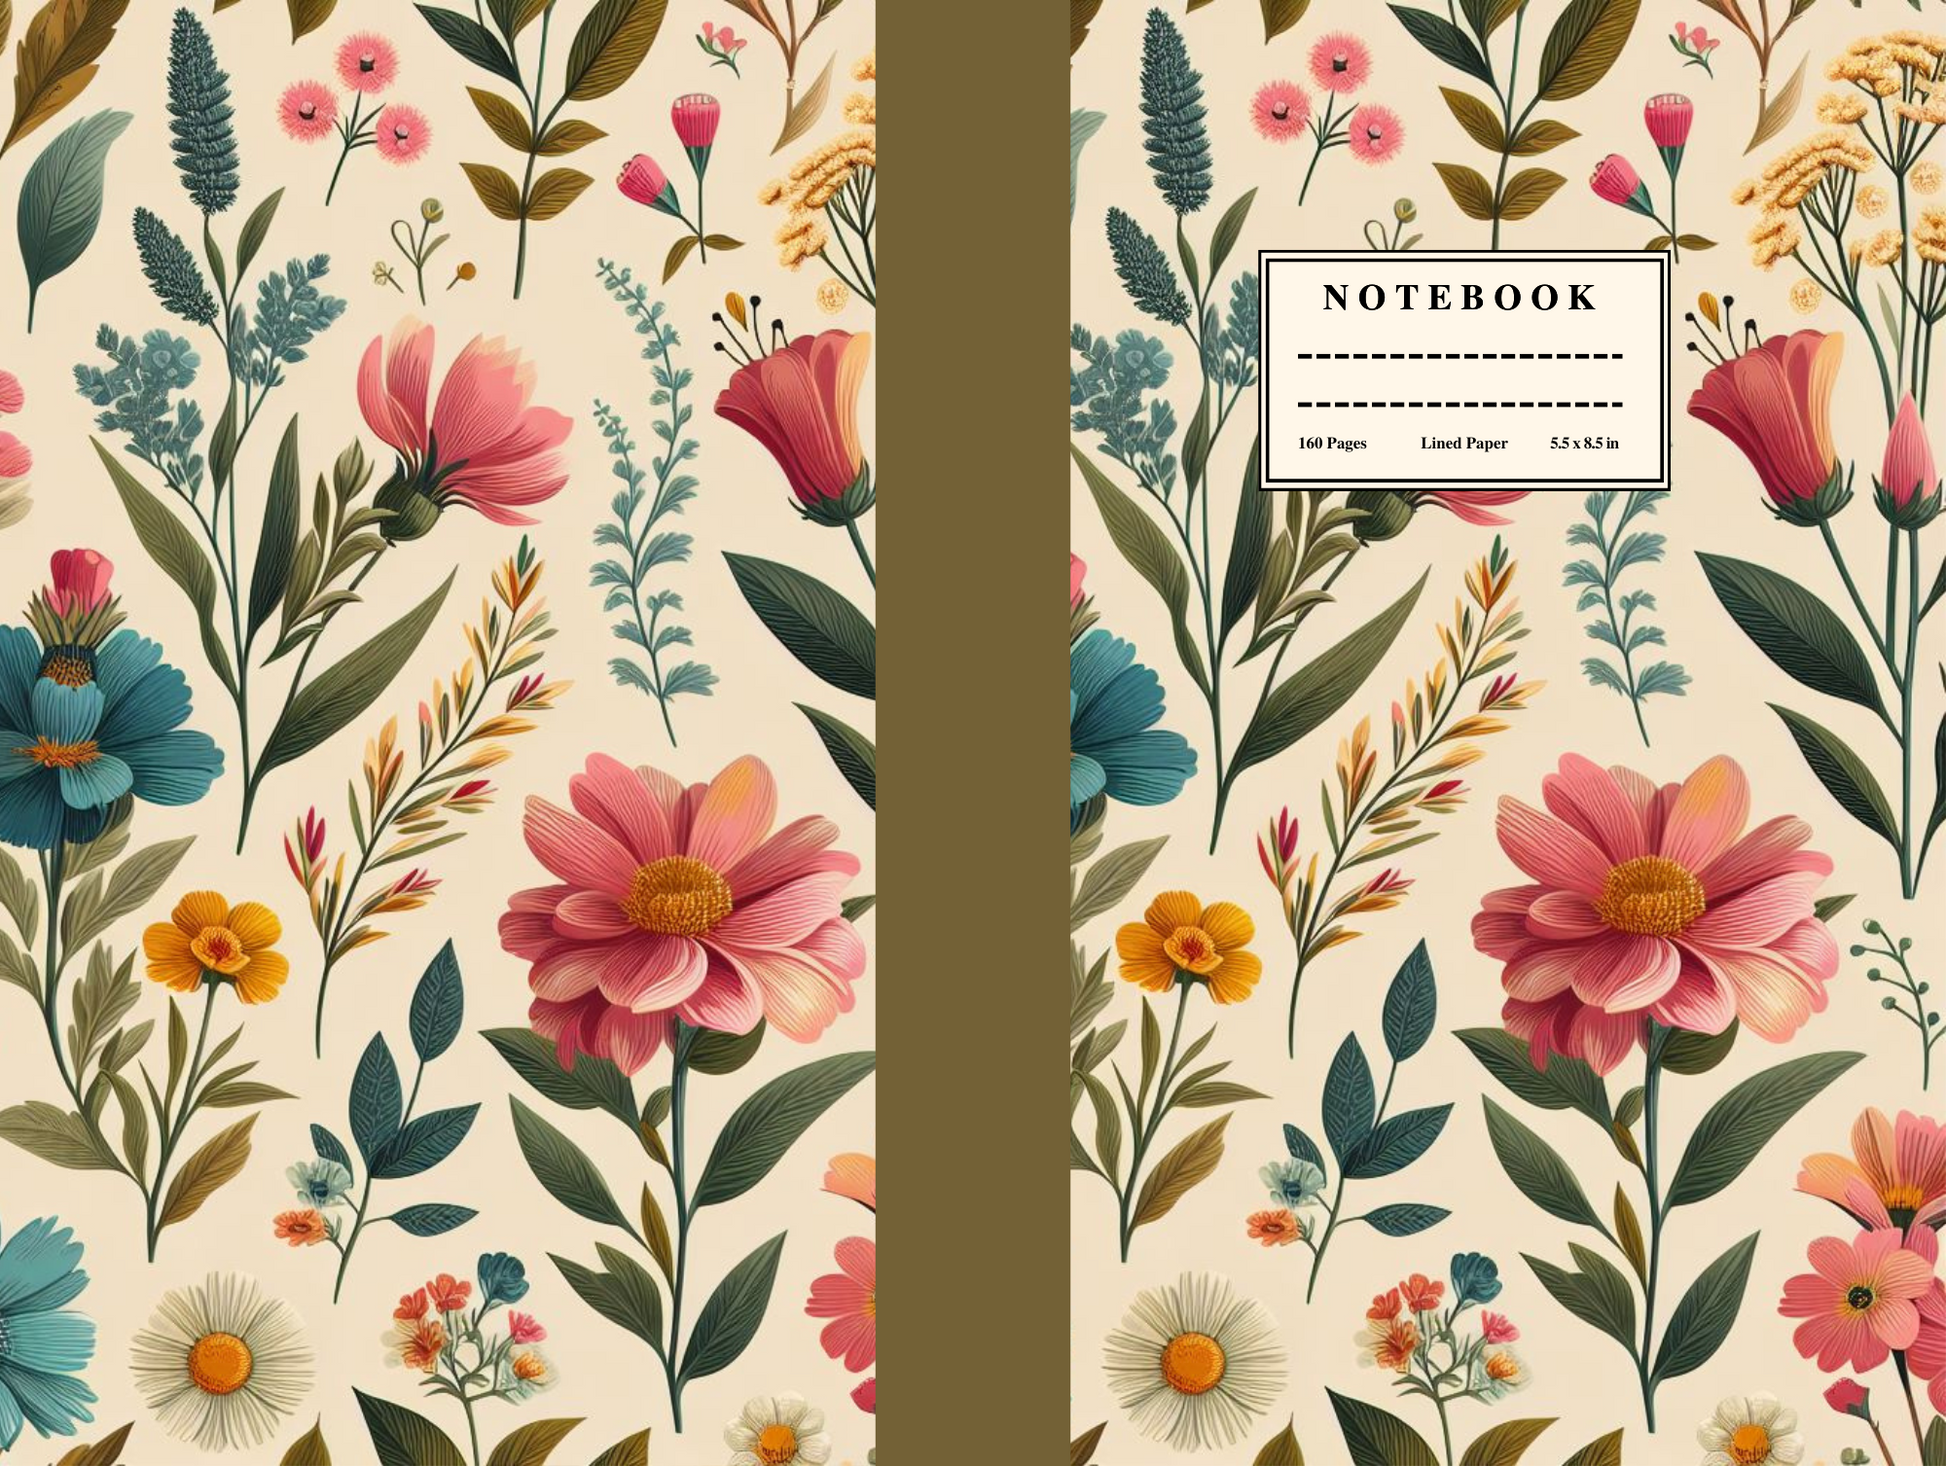 Notebook: Vintage Floral Wildflower Cover 160 Lined Cream Pages 5.5" X 8.5" Hardcover Writing Journal Diary for School Collage Work & Home